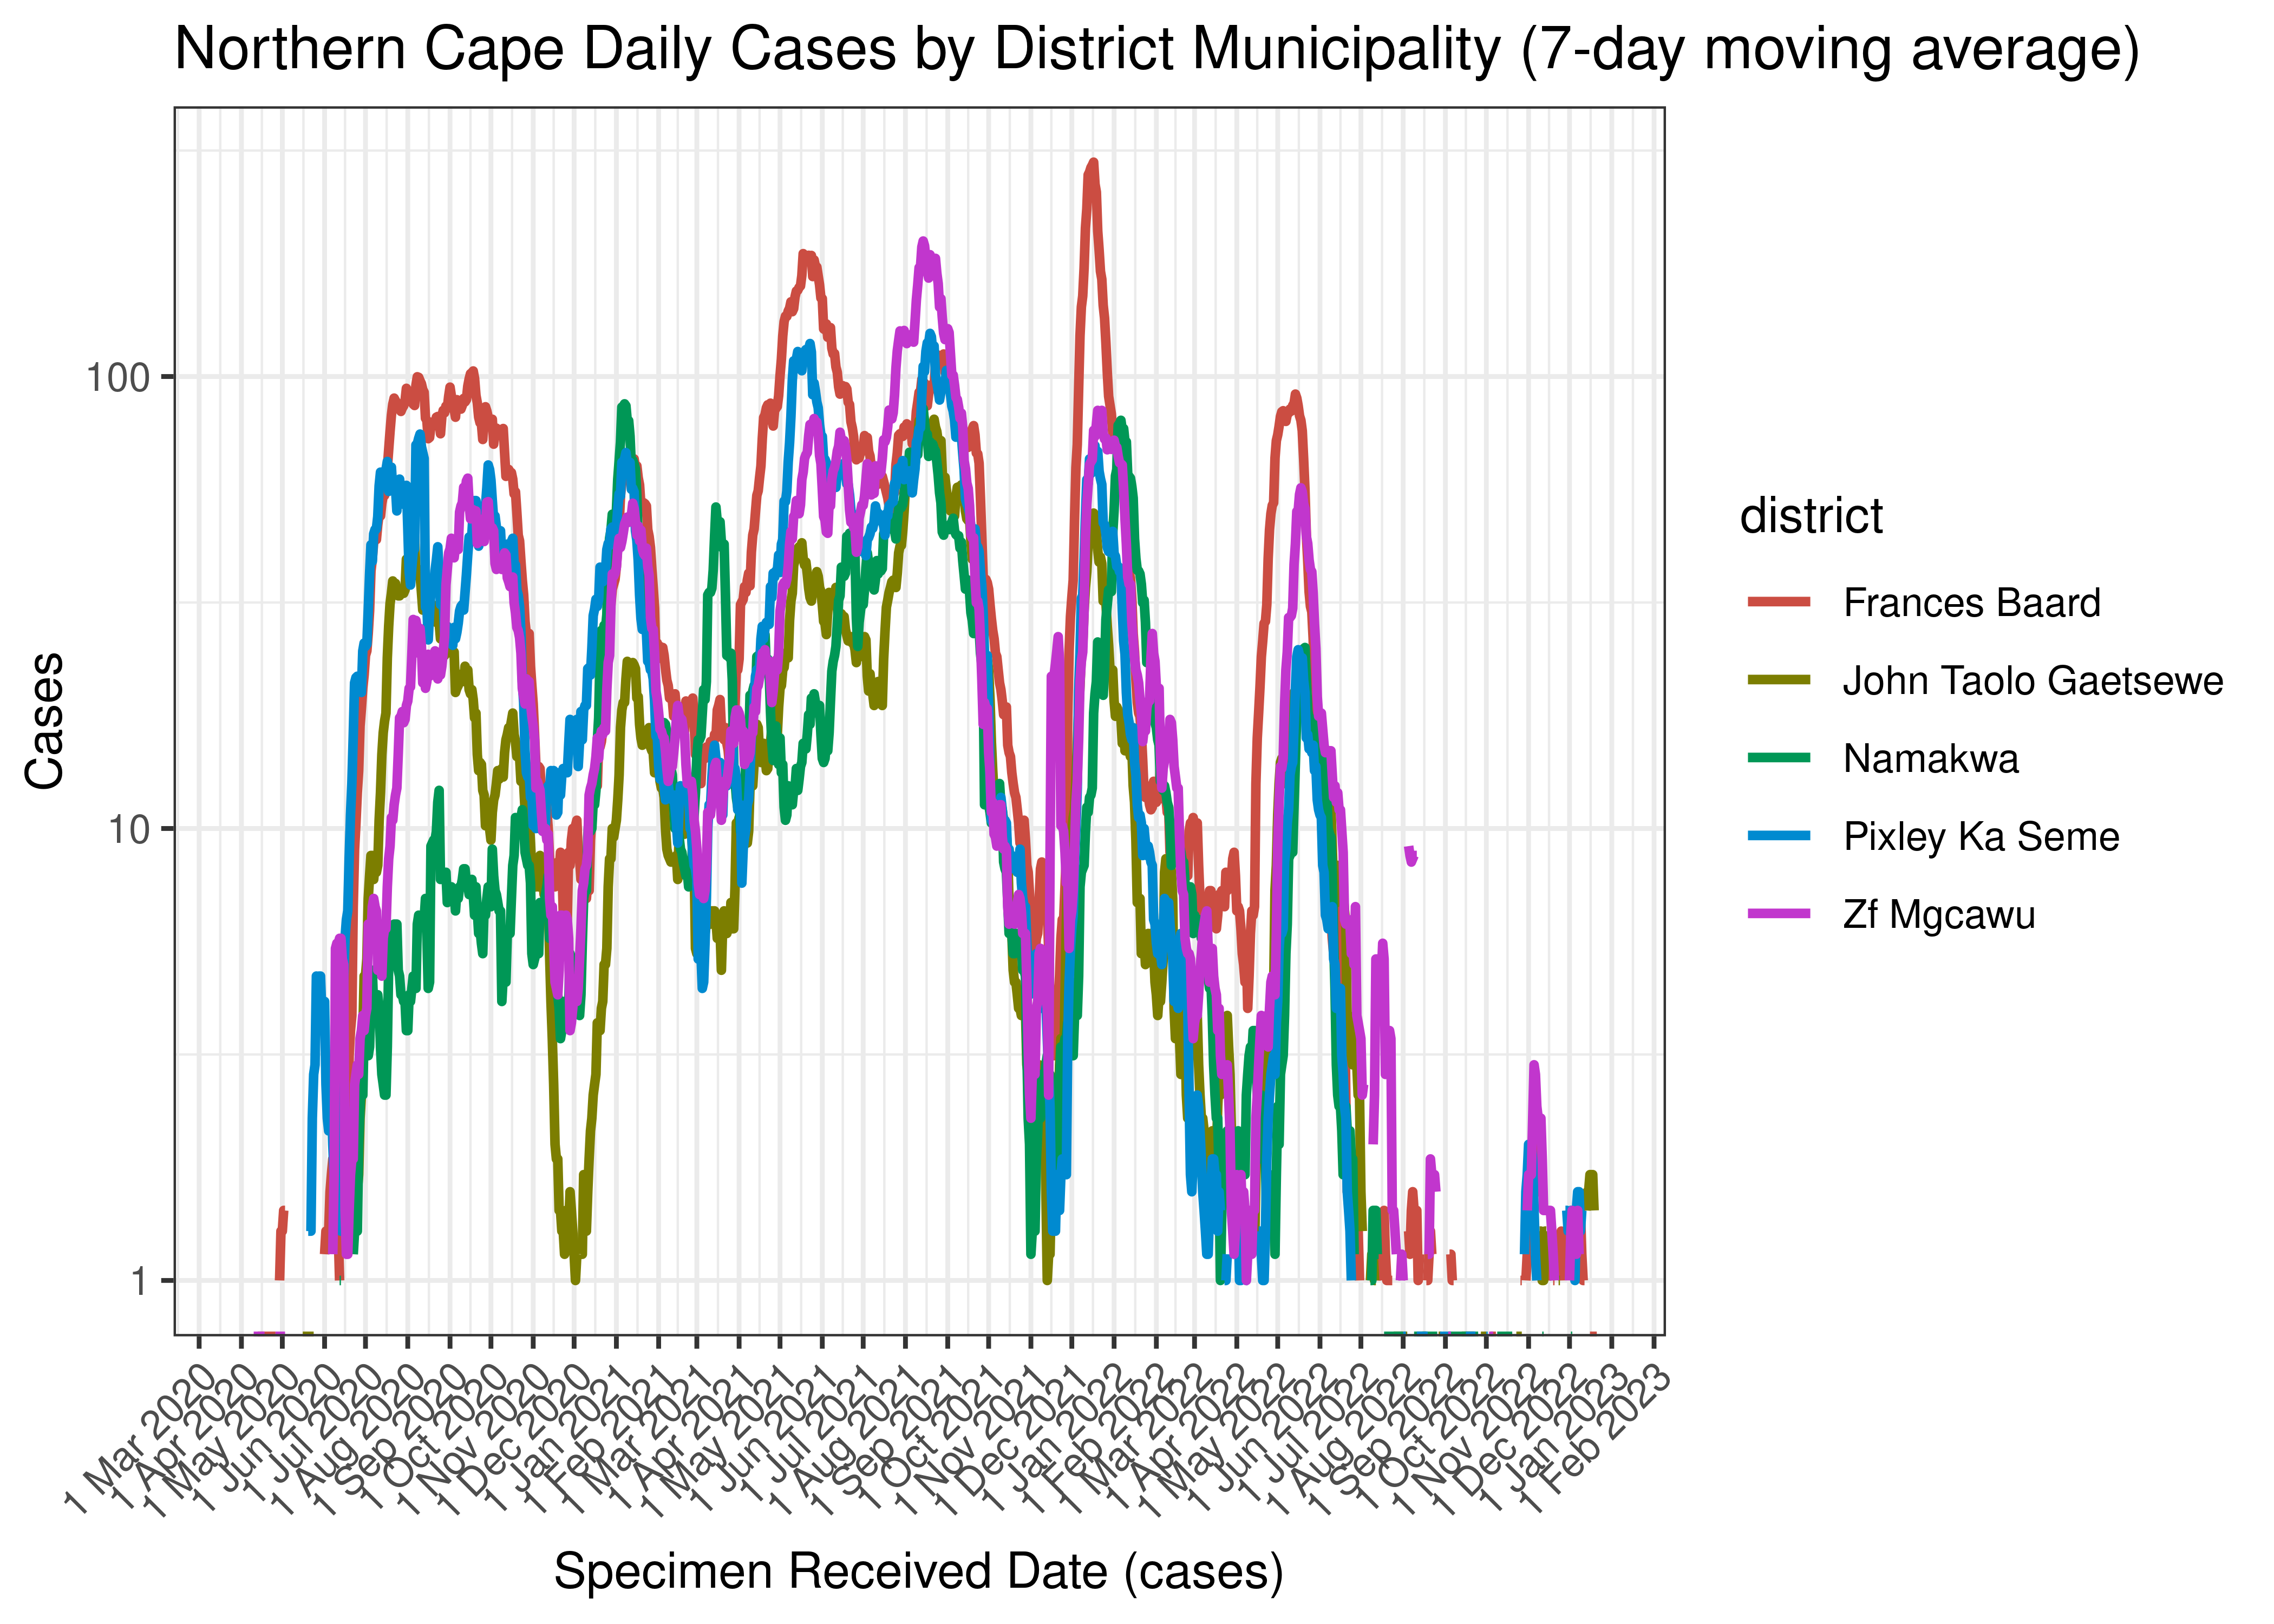 Northern Cape Daily Cases by District Municipality (7-day moving average)